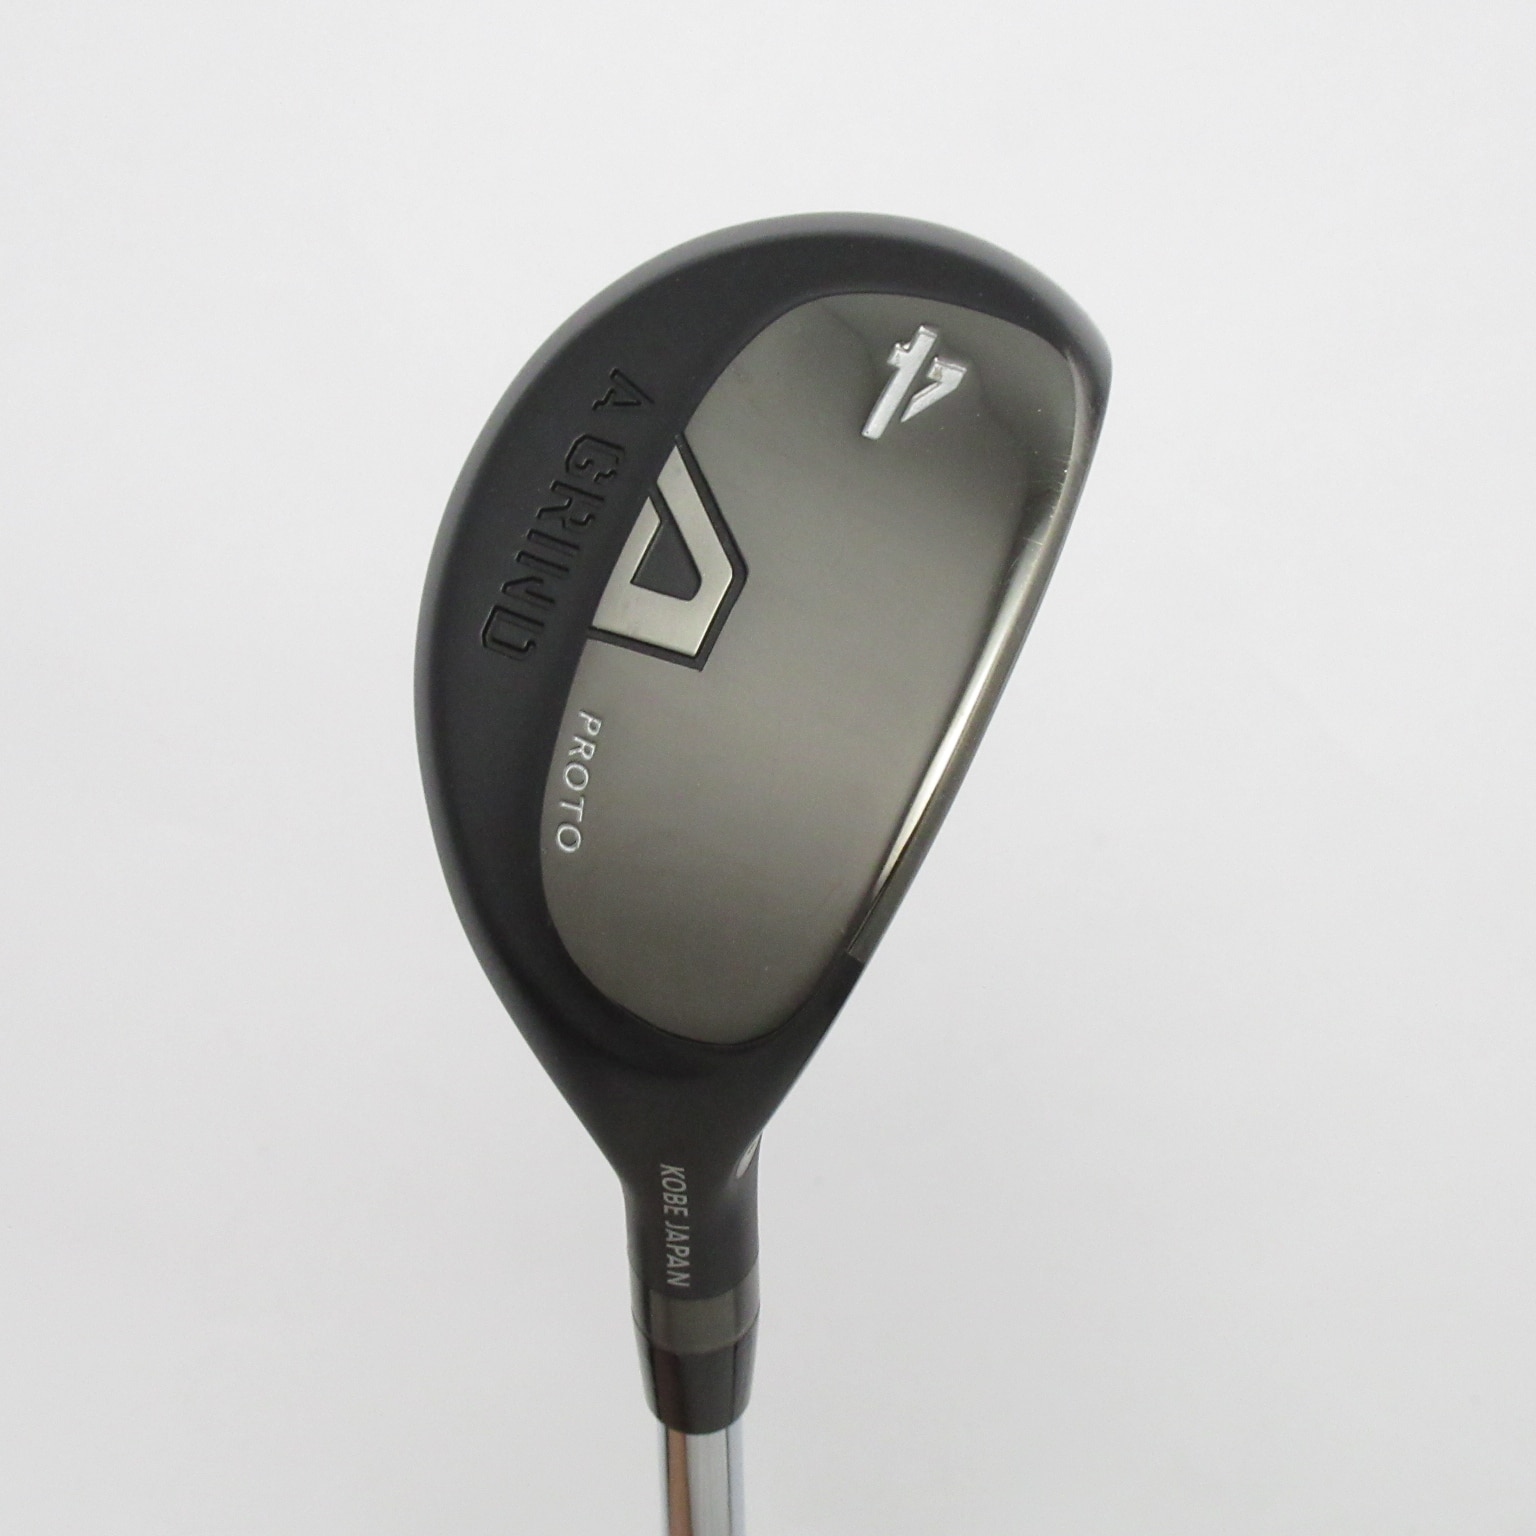 A GRIND UTILITY PROTOTYPE エーデザインゴルフ A DESIGN GOLF 通販